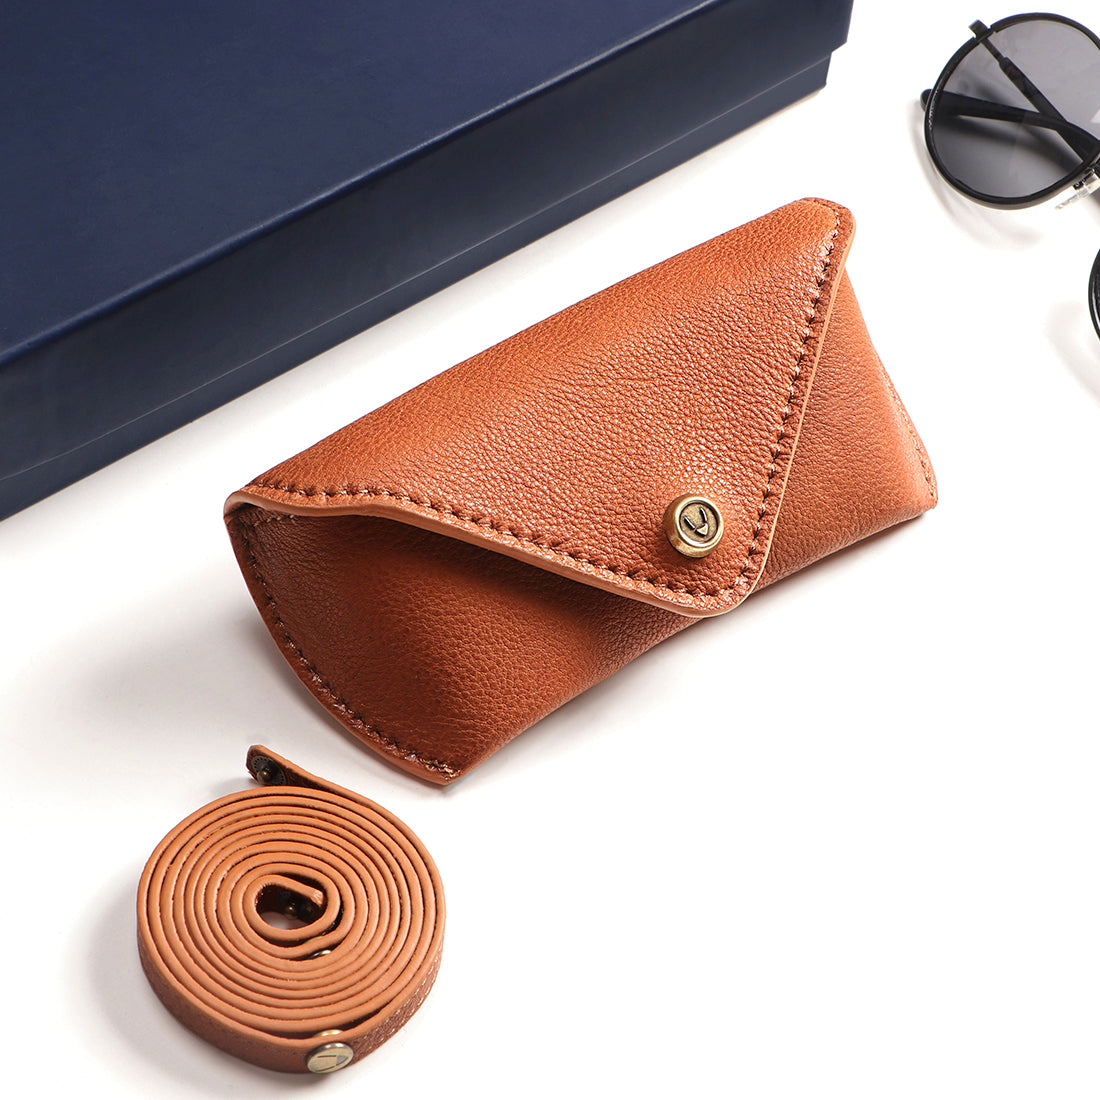 Navy Sunglasses Case | Leather sunglass case made in USA by KMM & Co.